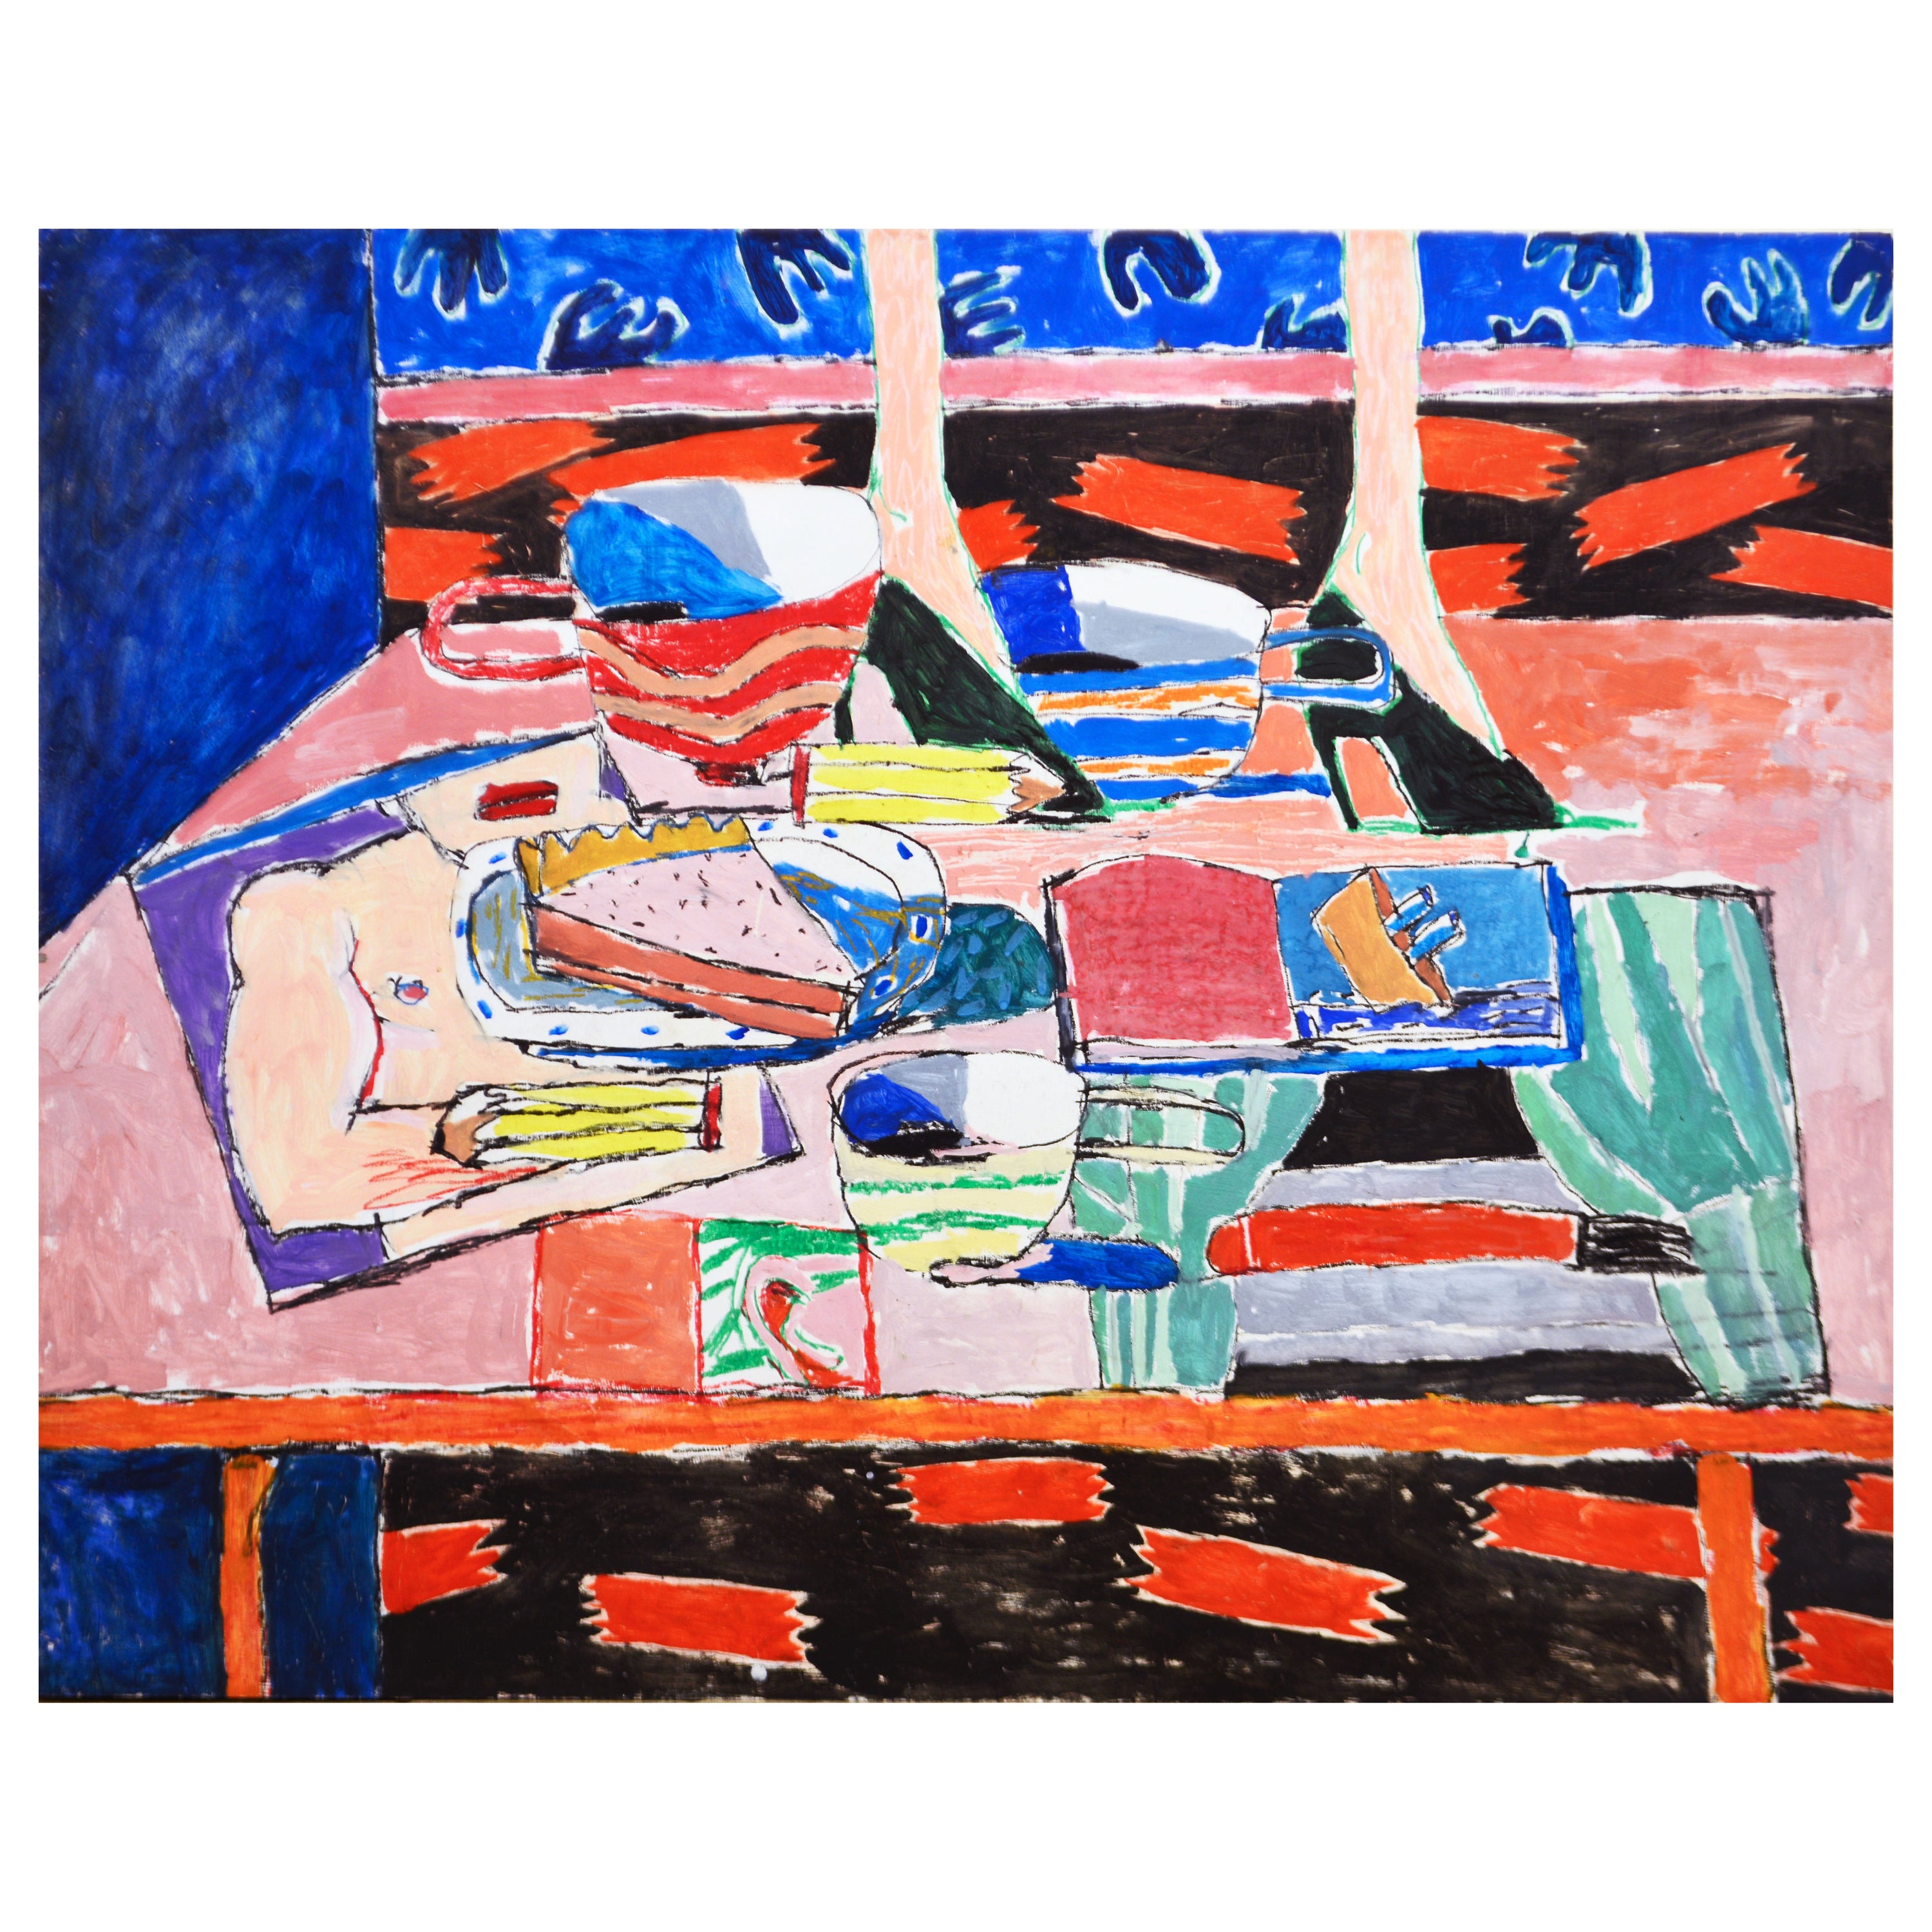 Fauve Matisse Inspired Painting, TheArtist's Desk, with Catching Artsy Narrative For Sale